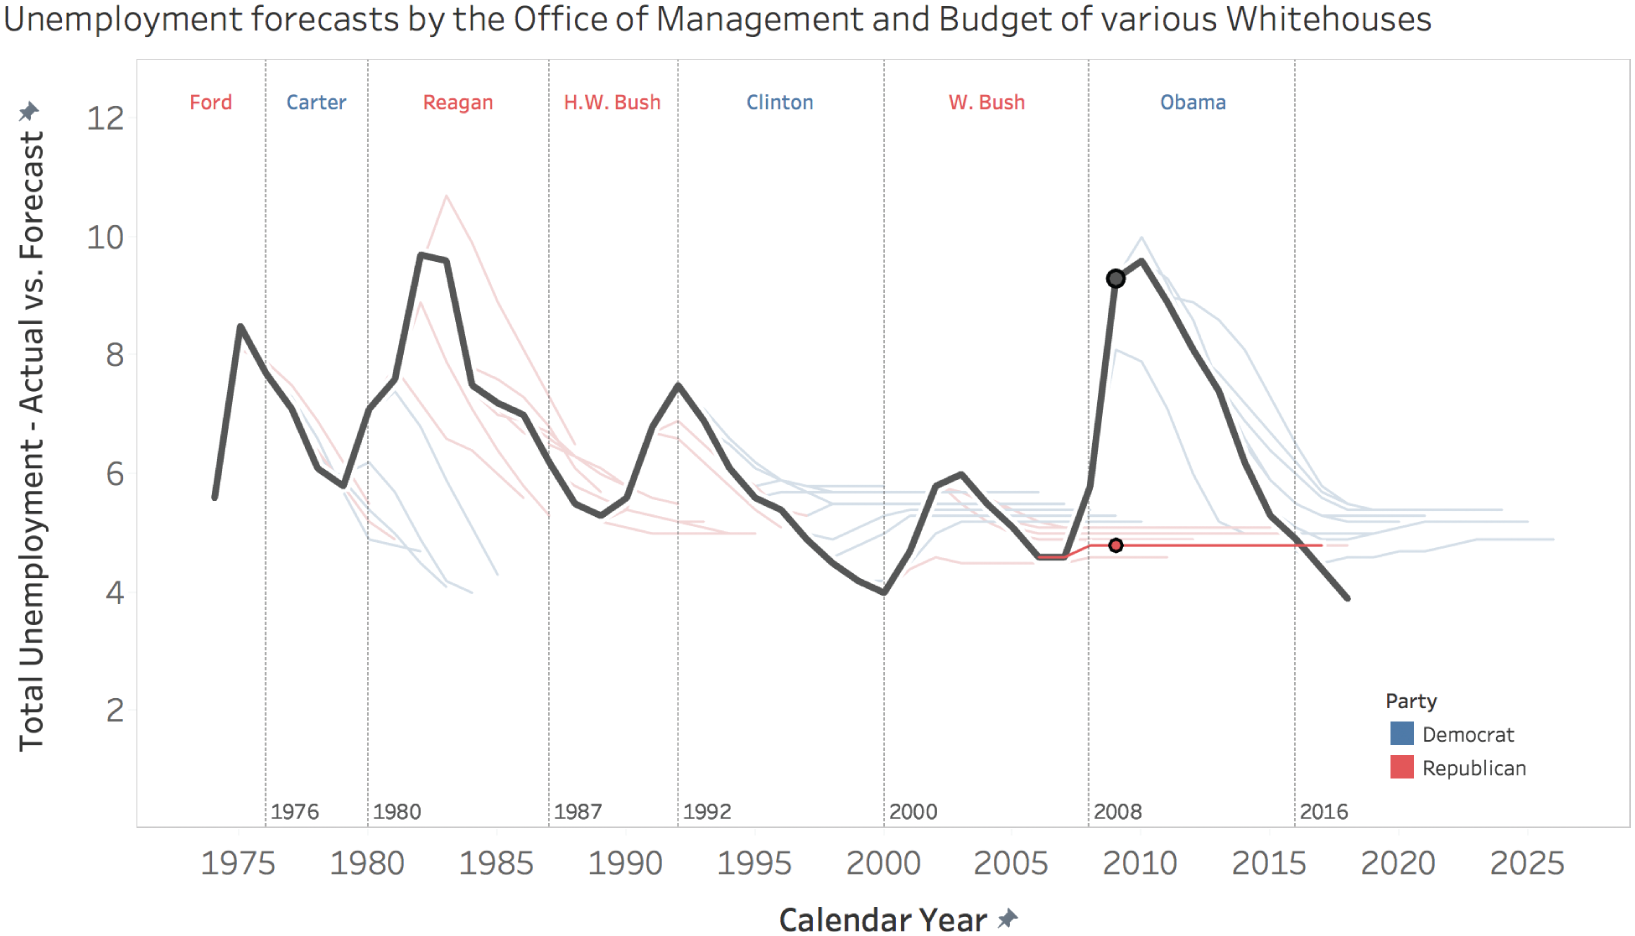 Graph depicting the unemployment forecasts by the Office Management and Budget of various Whitehouse administrations.